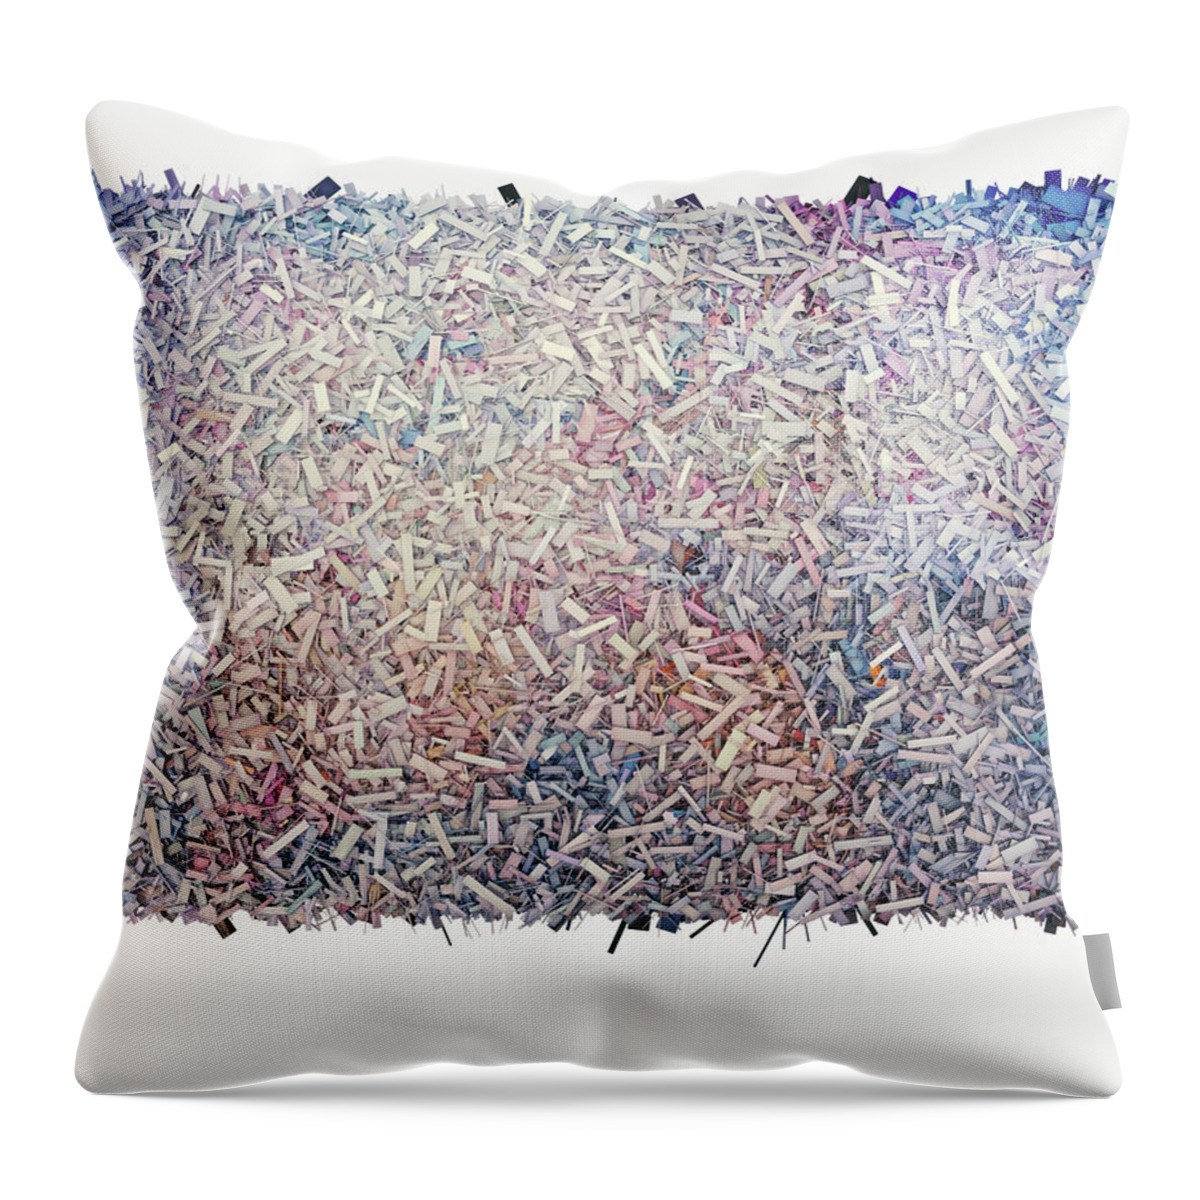 Abstract Throw Pillow featuring the digital art Abstract 5 by Scott Norris